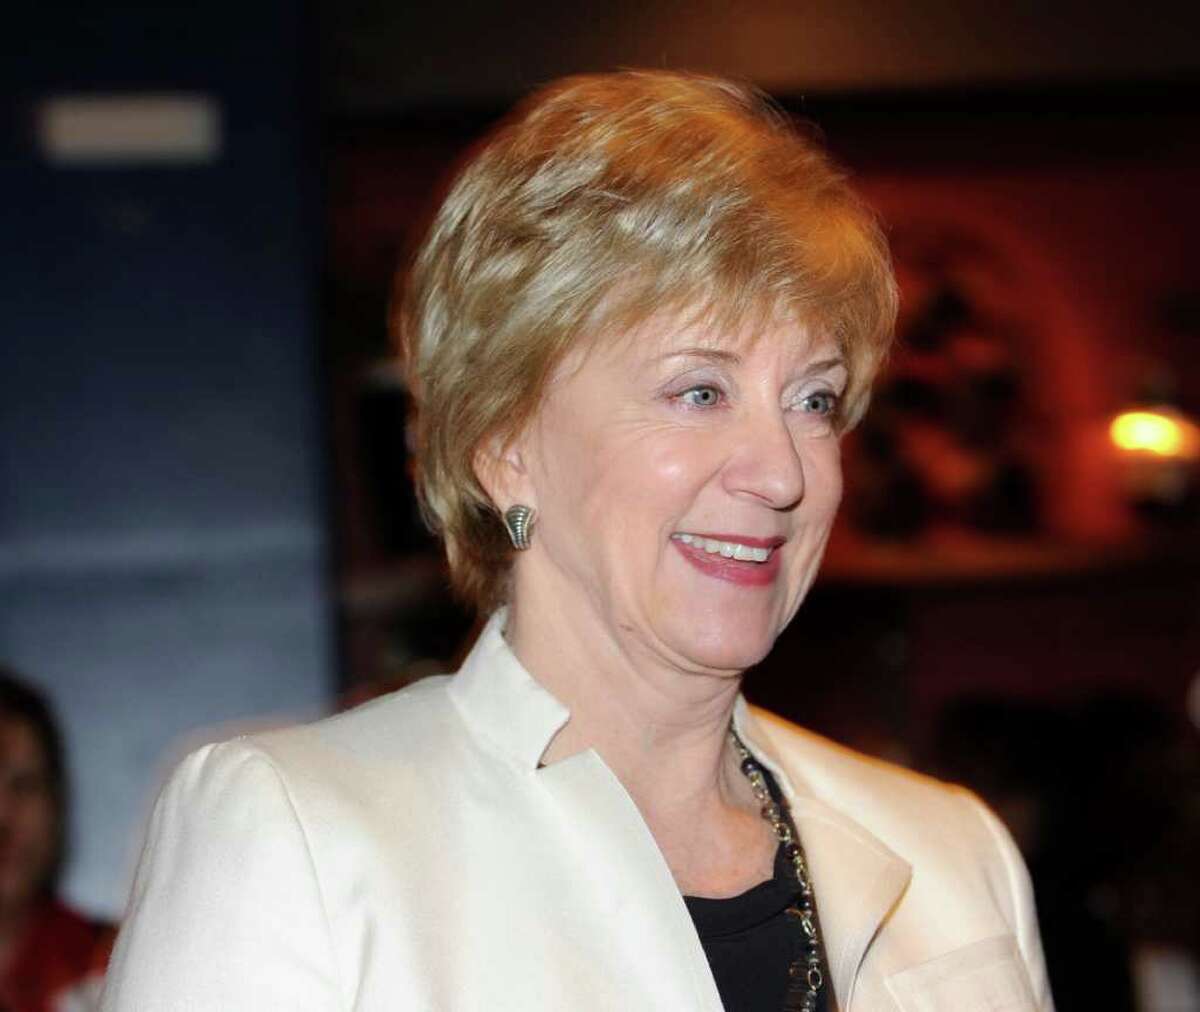 Republican U.S. Senate candidate Linda McMahon meets with area residents at SBC Restaurant & Brewery in Stamford, Thursday night, Feb. 2, 2012.